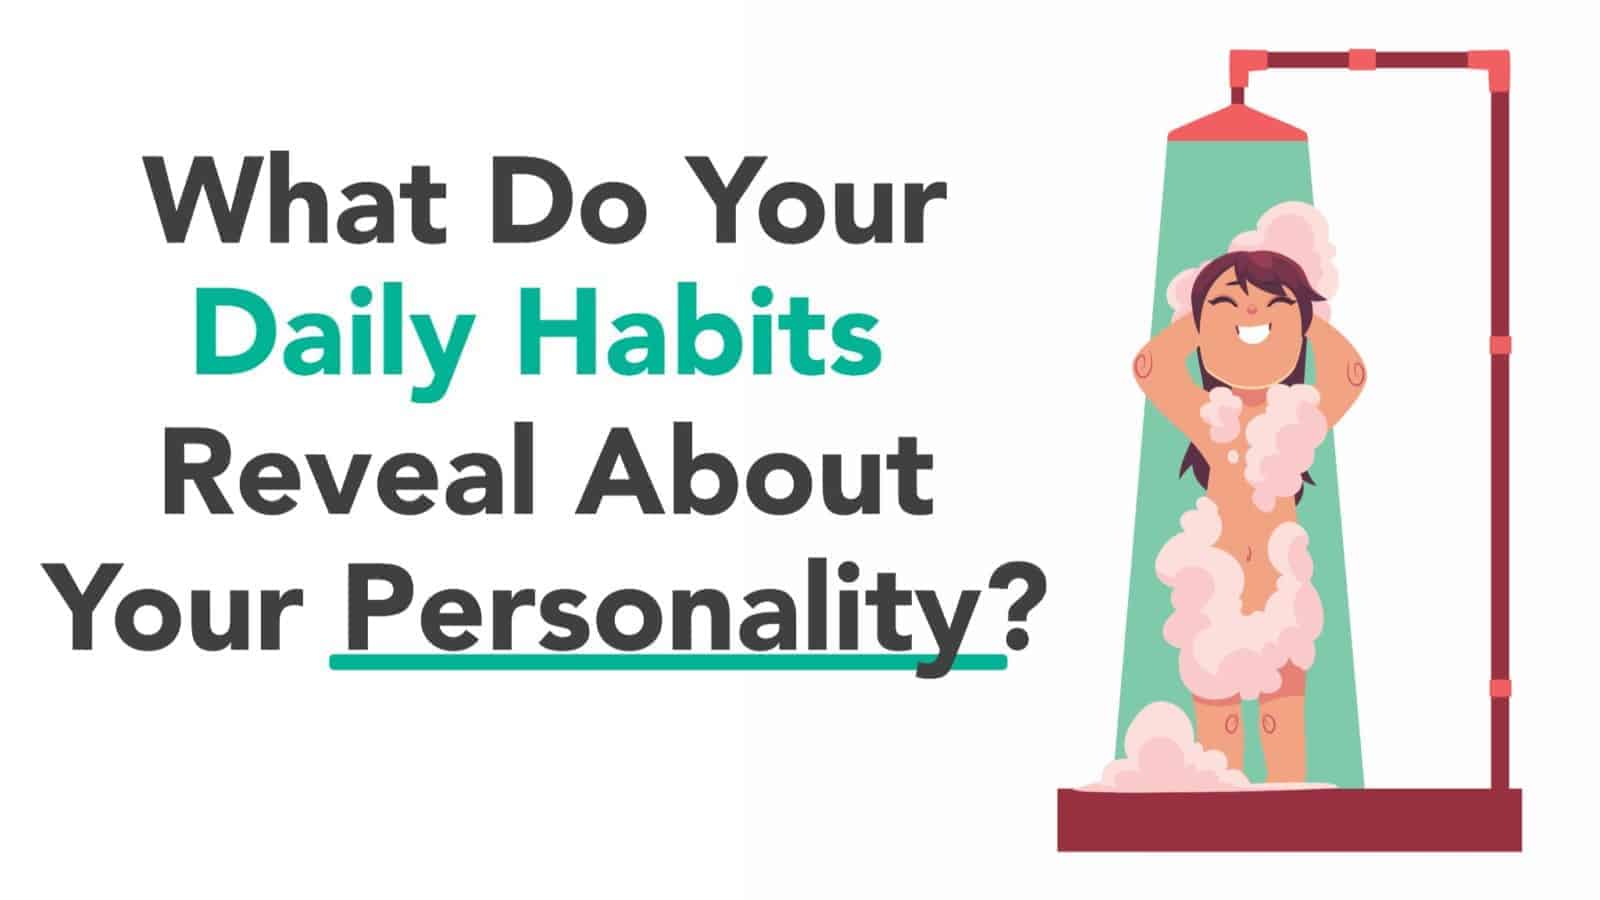 What Do Your Daily Habits Reveal About Your Personality?